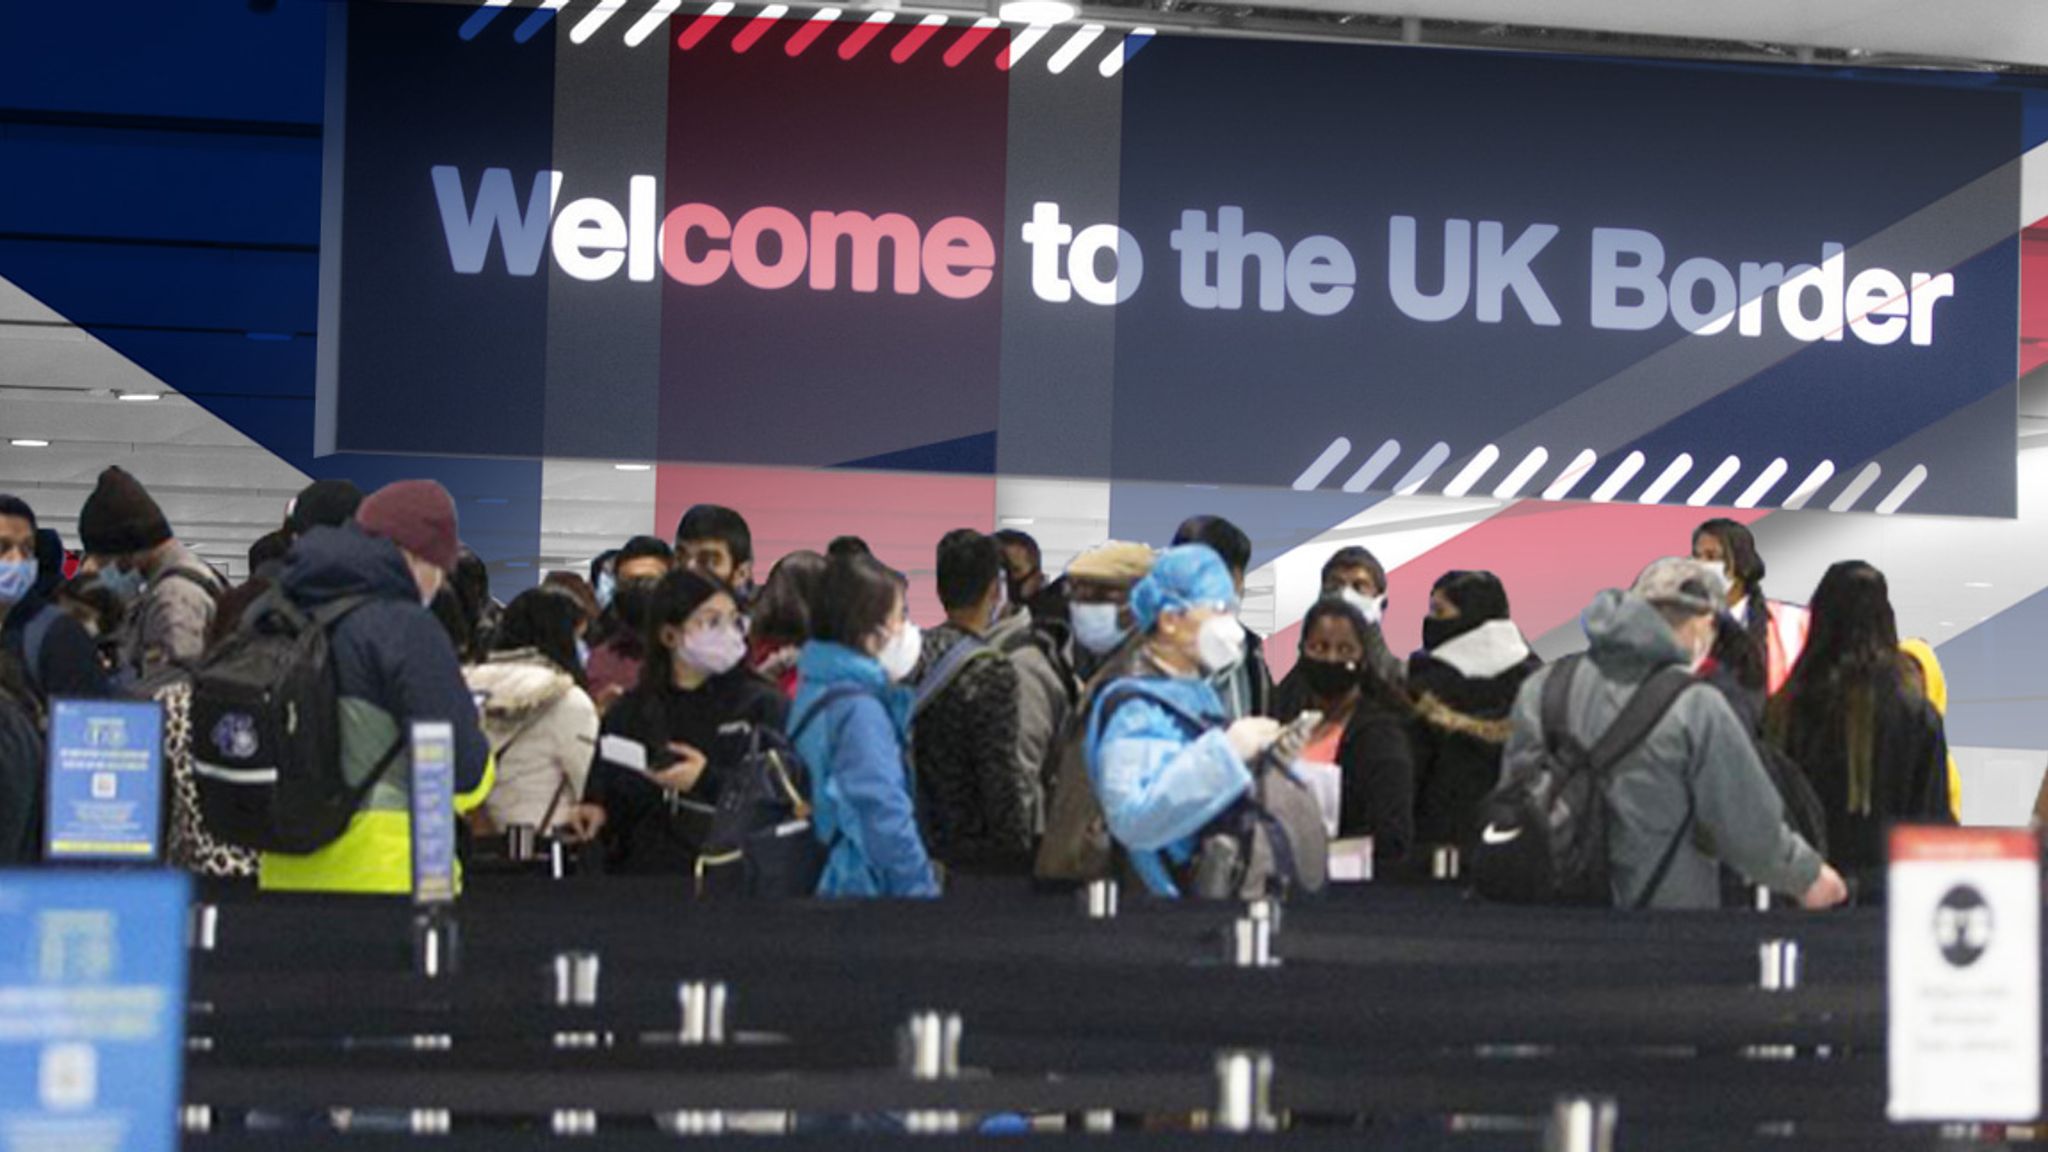 The Rise in UK Immigration and What it Means for the Future - The Big UK  News Room